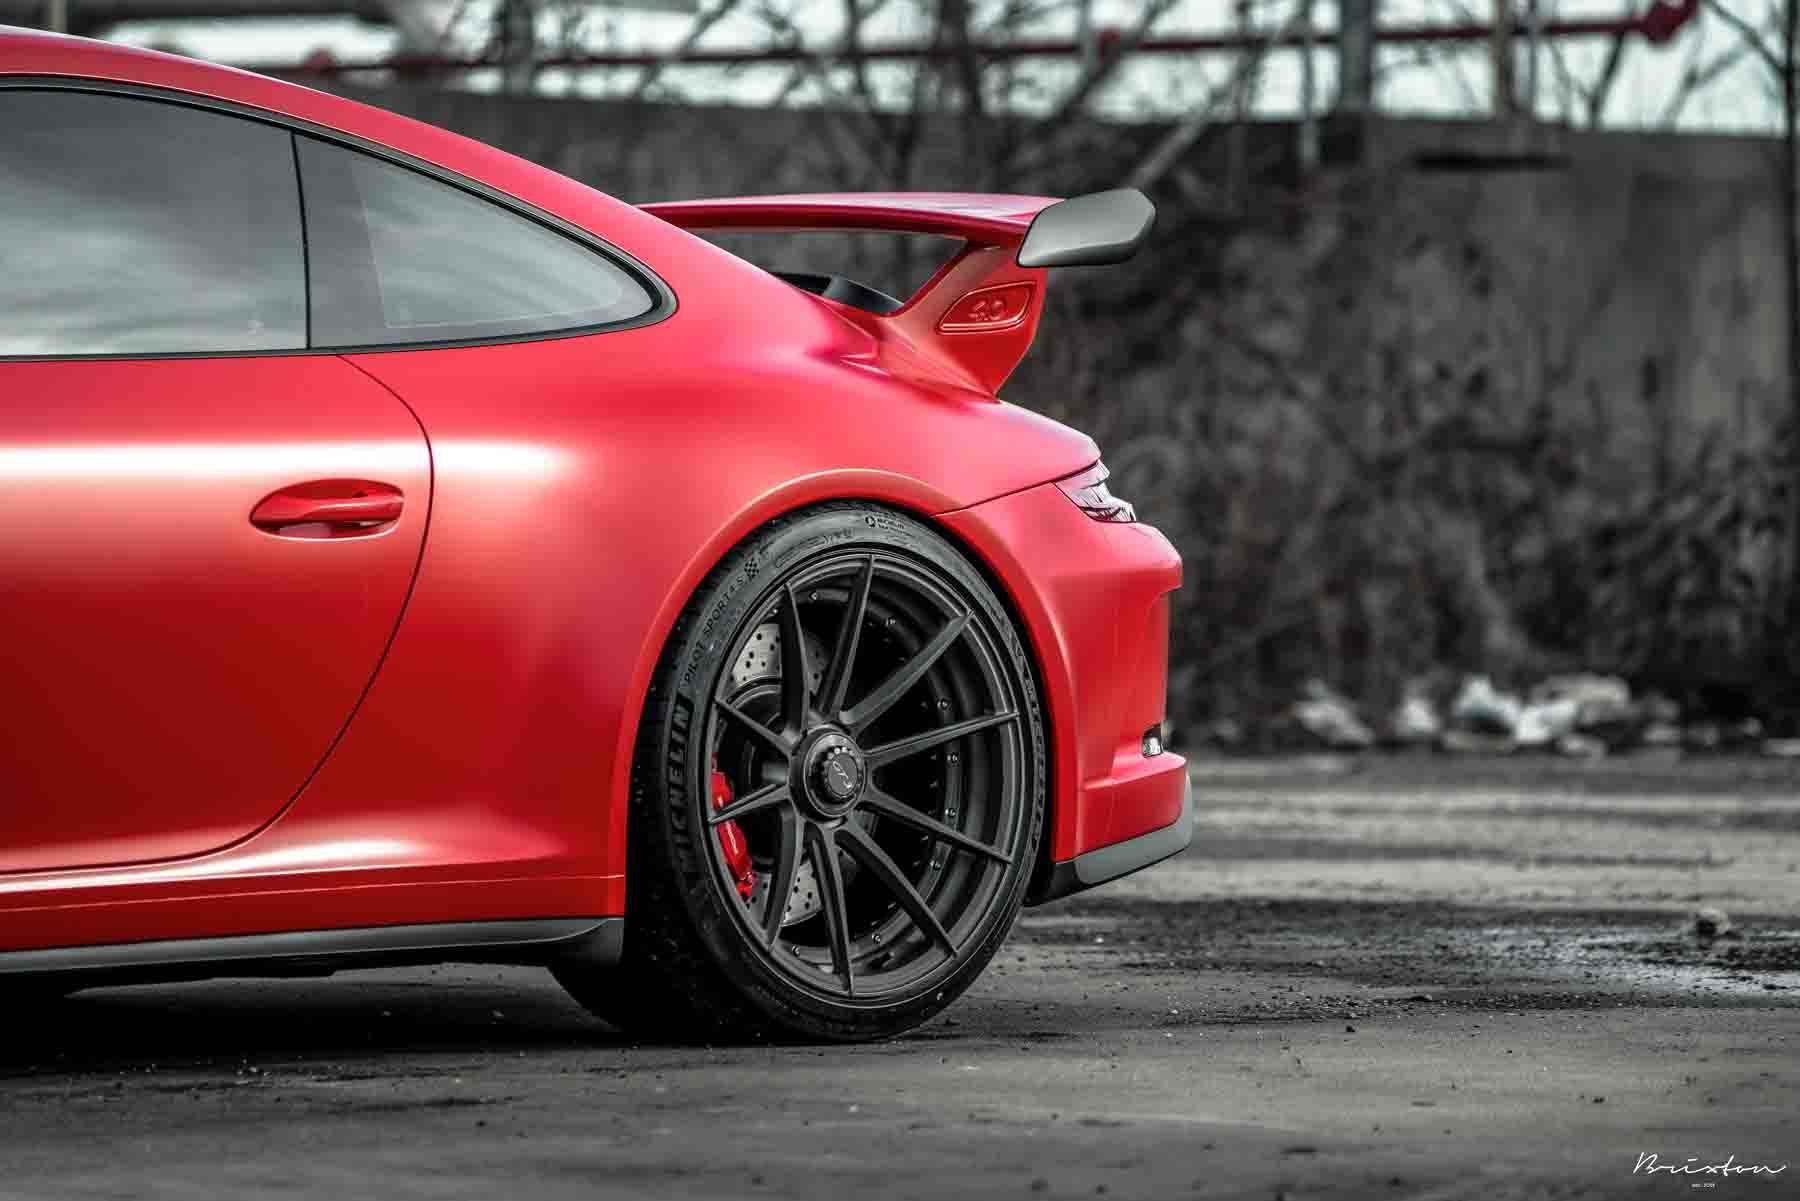 images-products-1-2415-232974703-brixton-forged-wr3-red-porsche-991-gt3-9912-20-concave-forged-wheels-center-lock-5.jpg